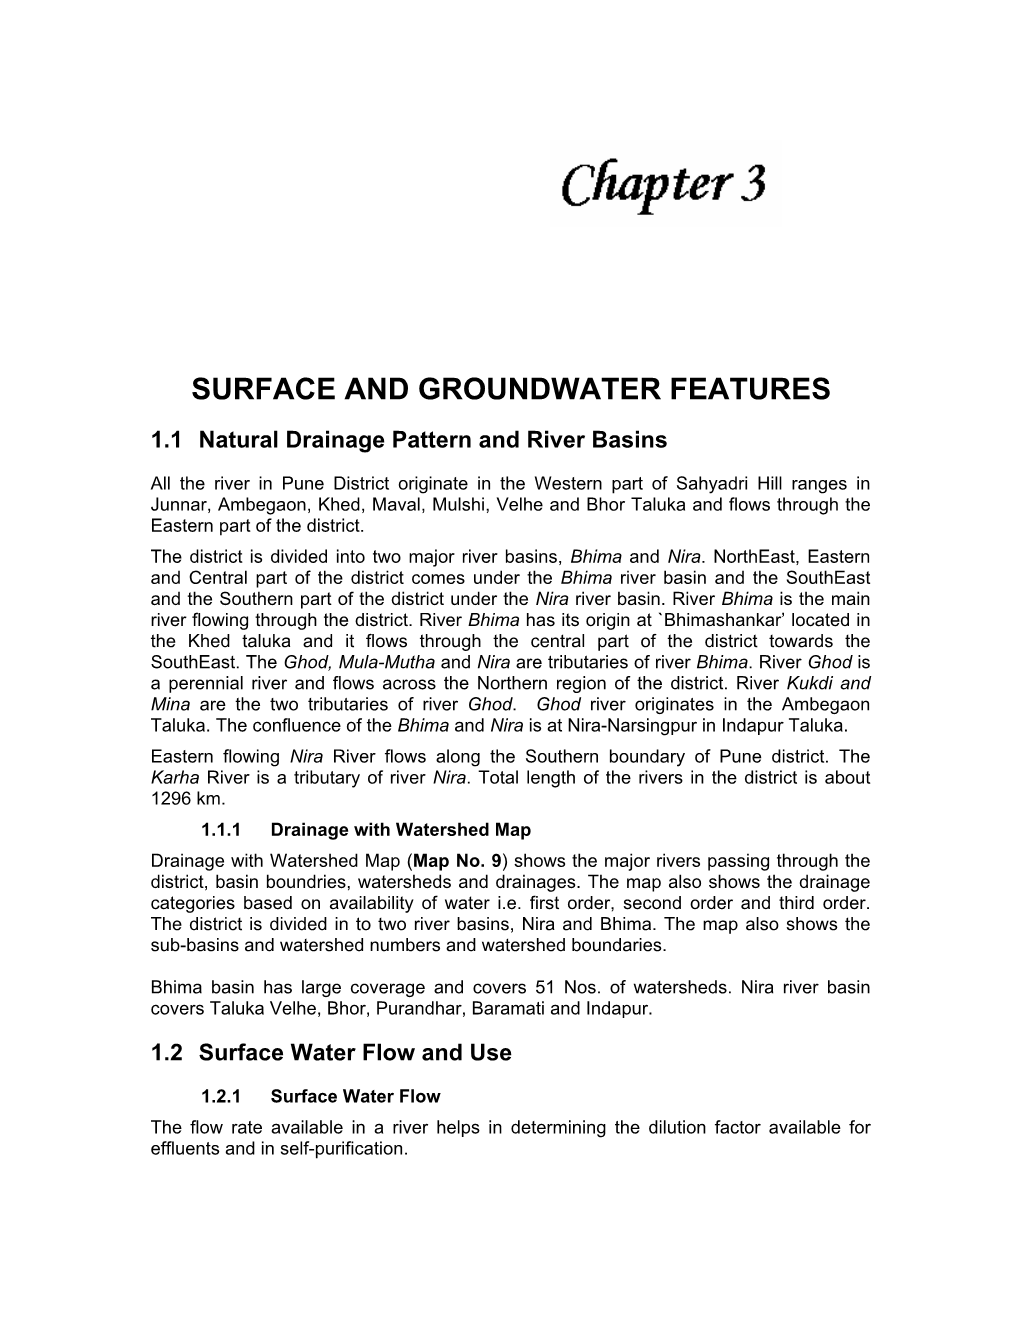 Surface and Groundwater Features